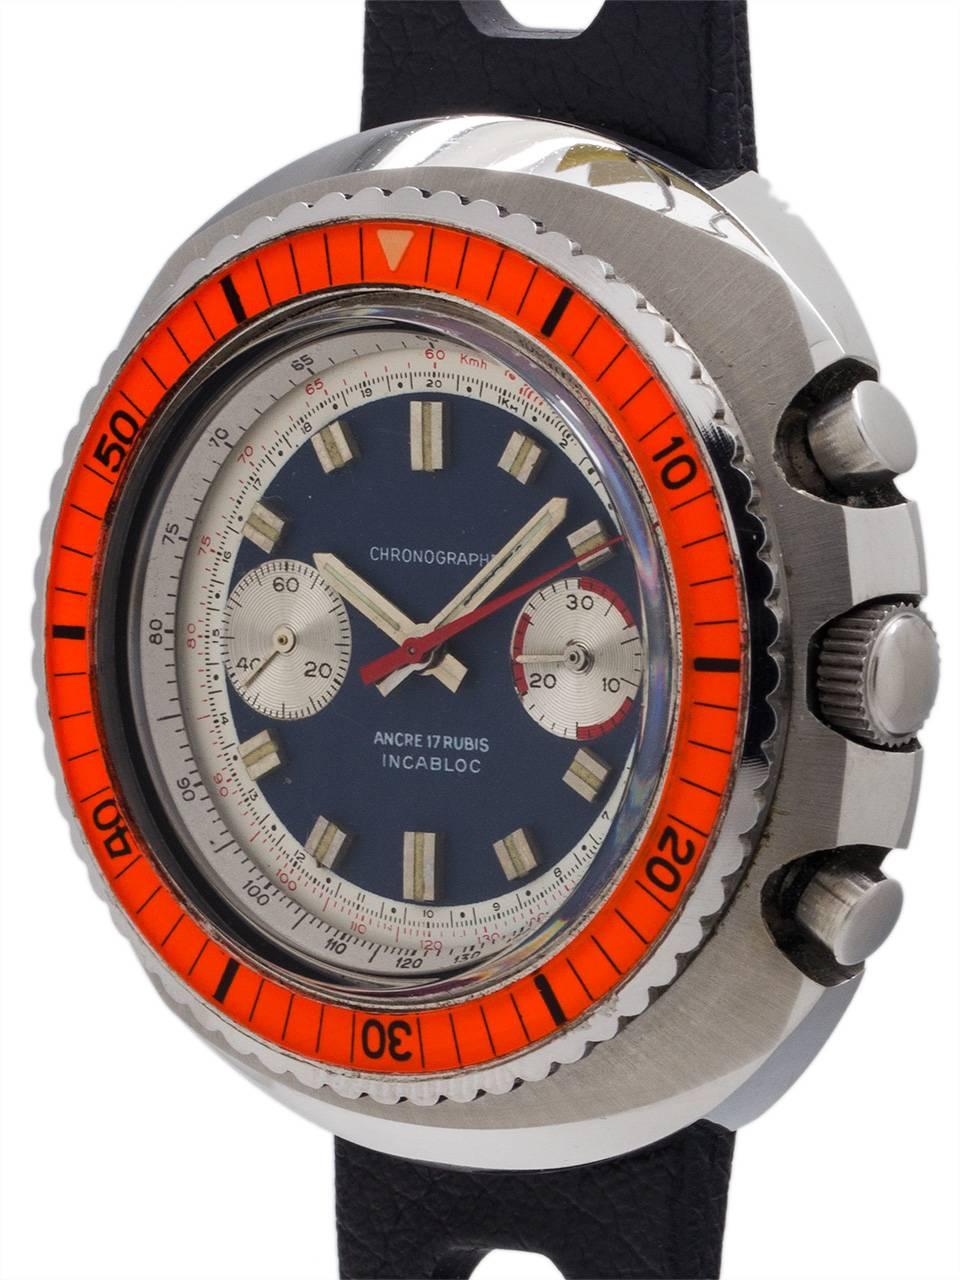 
Great looking oversize vintage Swiss 2 registers manual wind diver’s chronograph circa 1960’s. Featuring massive 47mm rounded cushion shaped brushed and polished finish case with protected crown and pushers, screw down caseback, and raised colorful